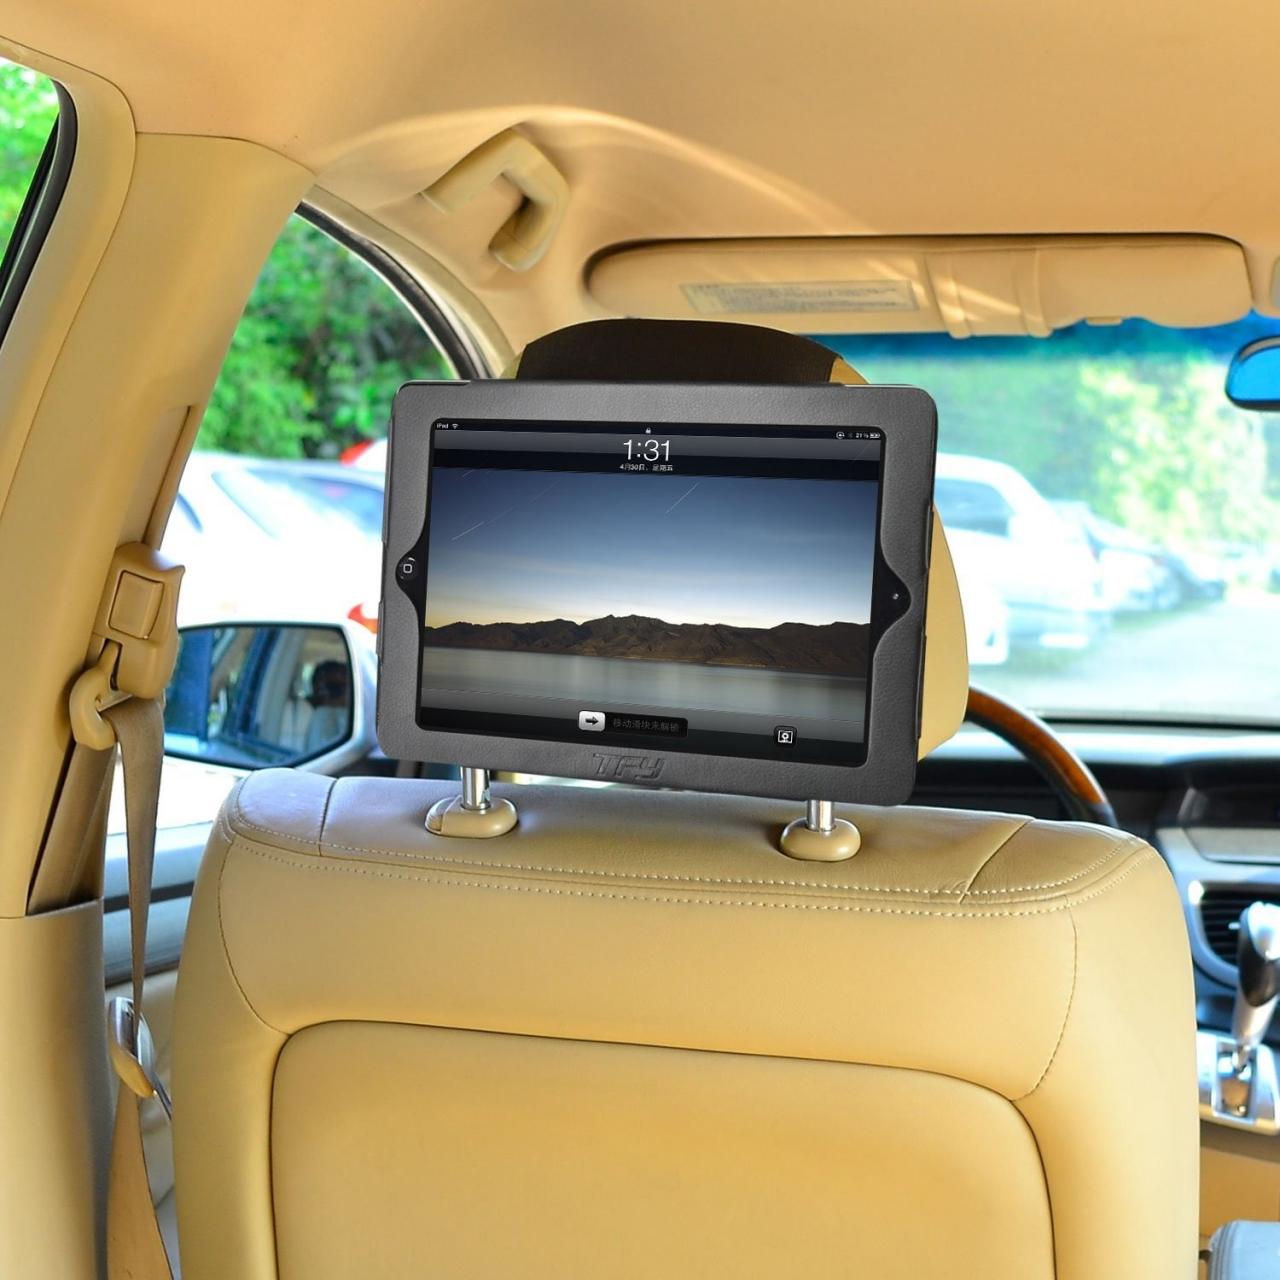 Best Car Headrest Mounts for iPad | iMore